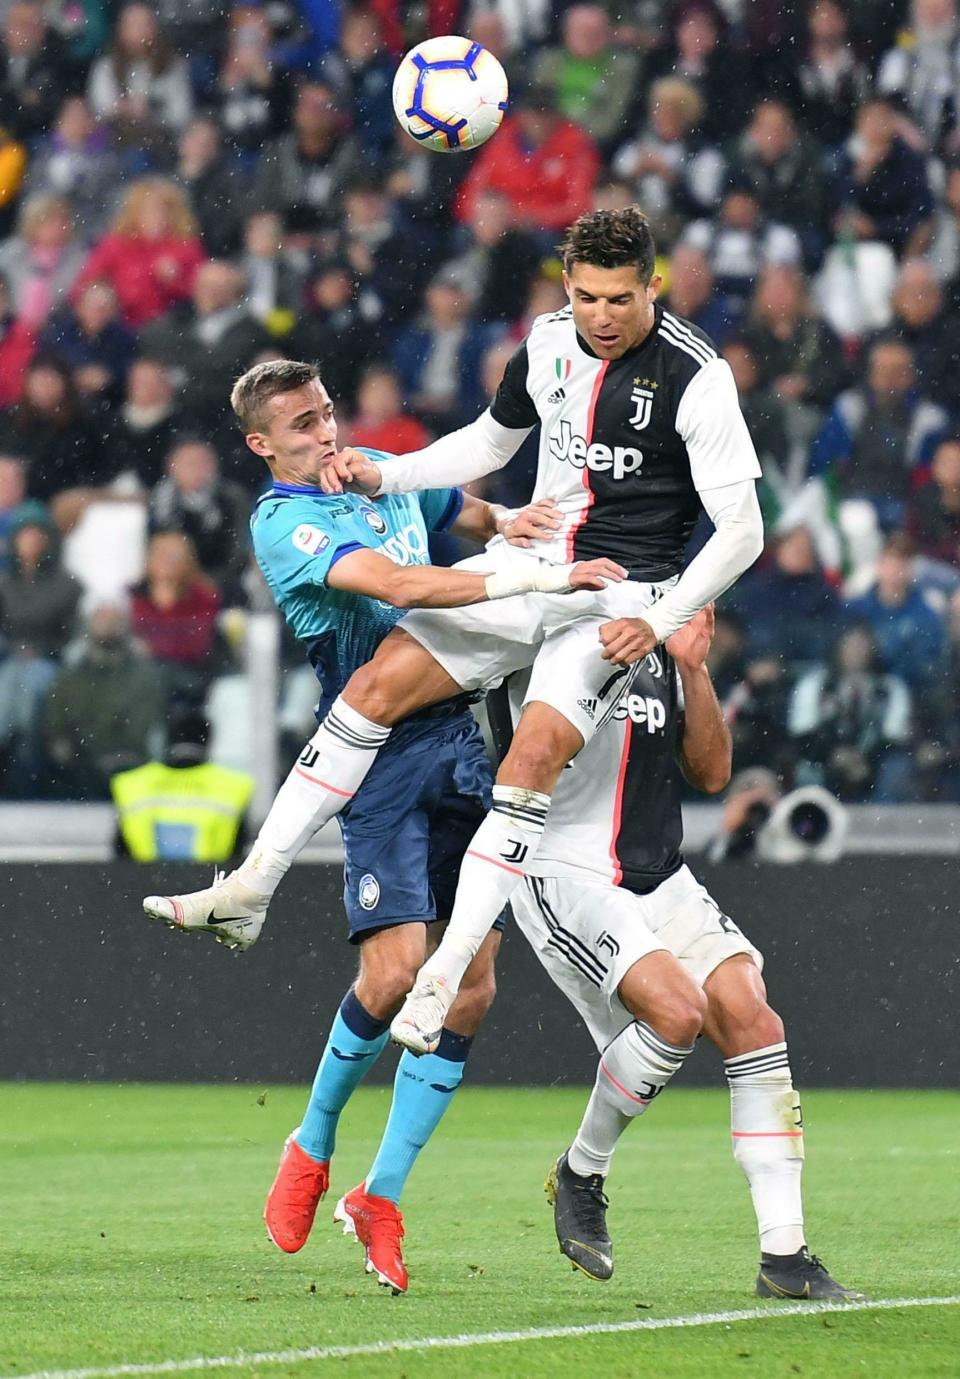 Juventus FC's Cristiano Ronaldo, top right, goes for the ball during a Serie A soccer match against Atalanta BC at the Allianz Stadium in Turin, Italy, Sunday, May 19, 2019. (Alessandro Di Marco/ANSA via AP)